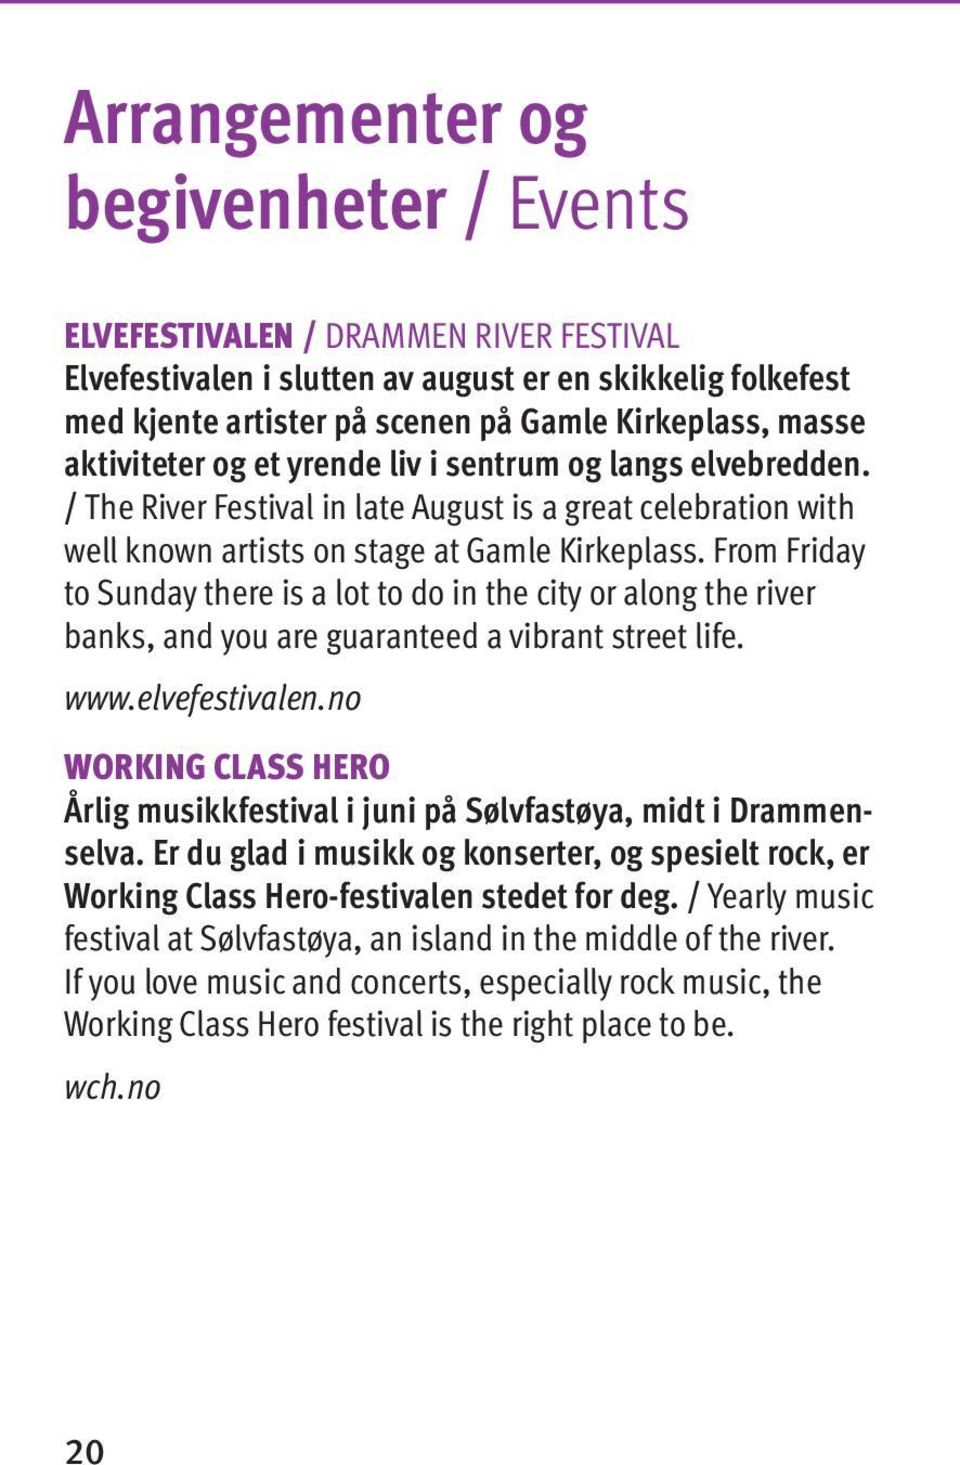 From Friday to Sunday there is a lot to do in the city or along the river banks, and you are guaranteed a vibrant street life. www.elvefestivalen.